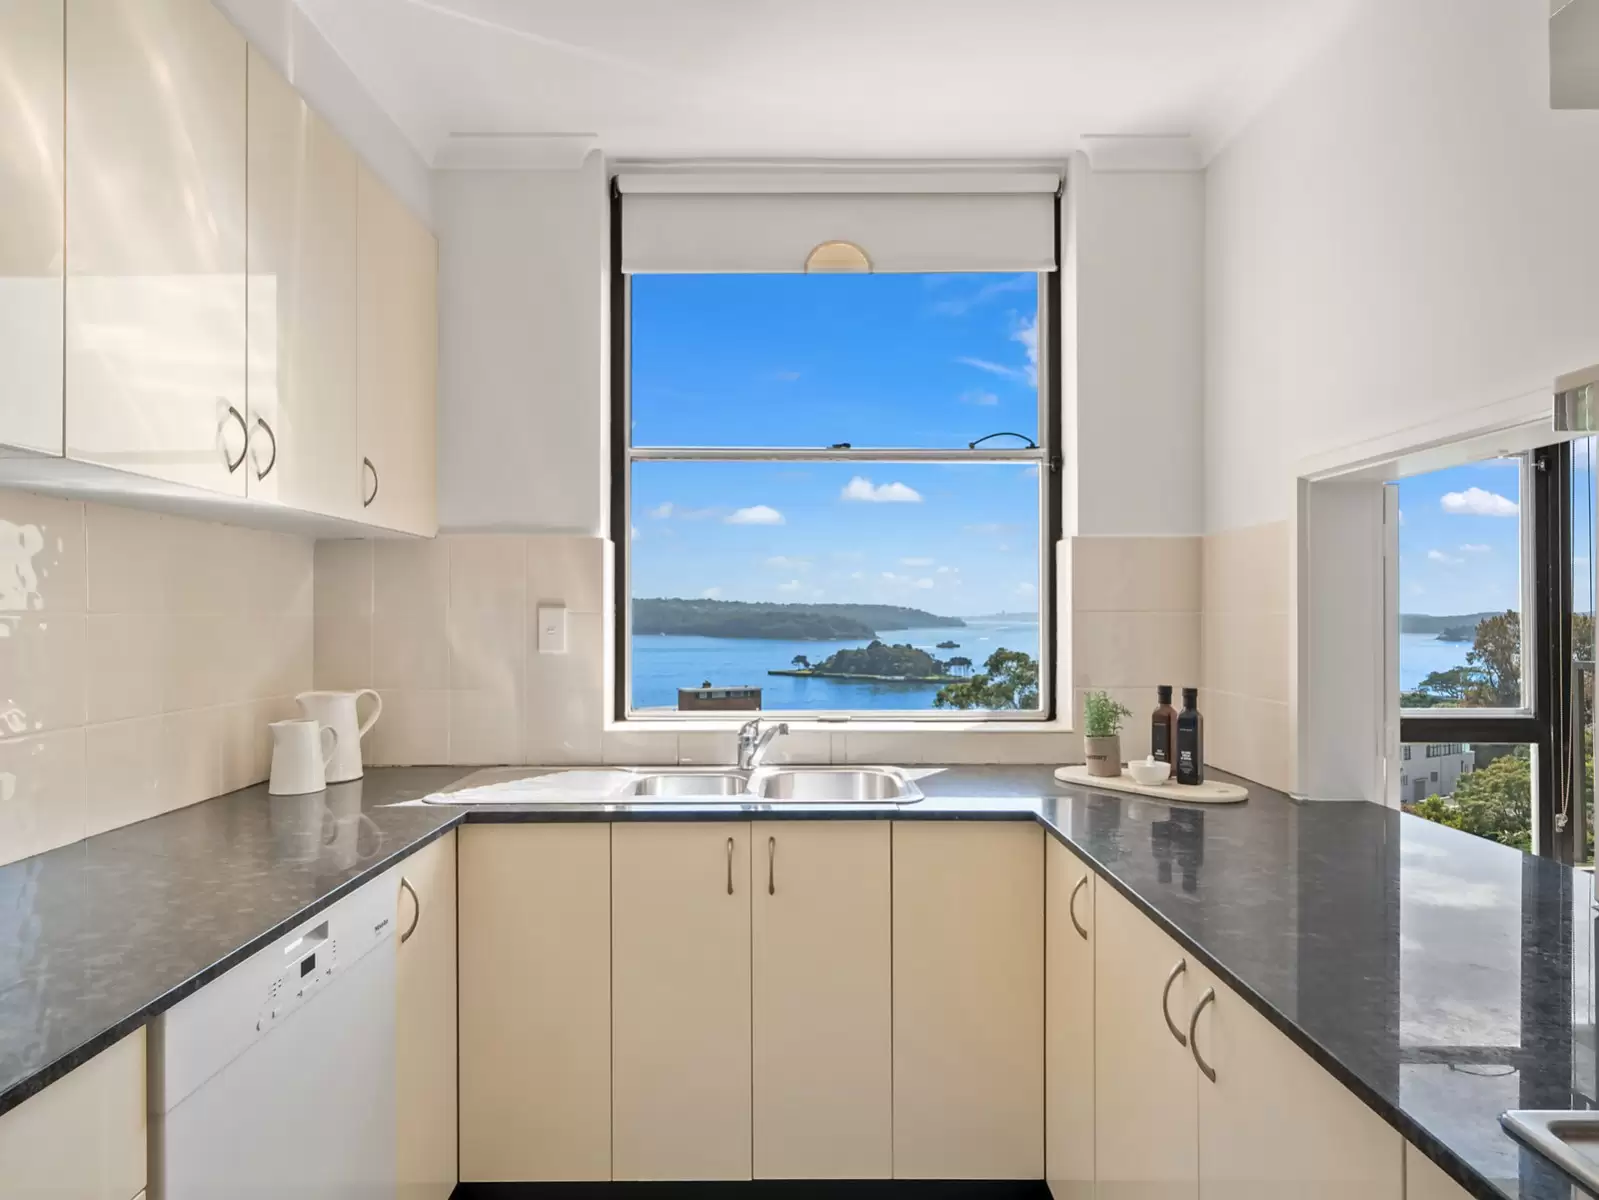 Photo #7: 6C/13-15 Thornton Street, Darling Point - Sold by Sydney Sotheby's International Realty